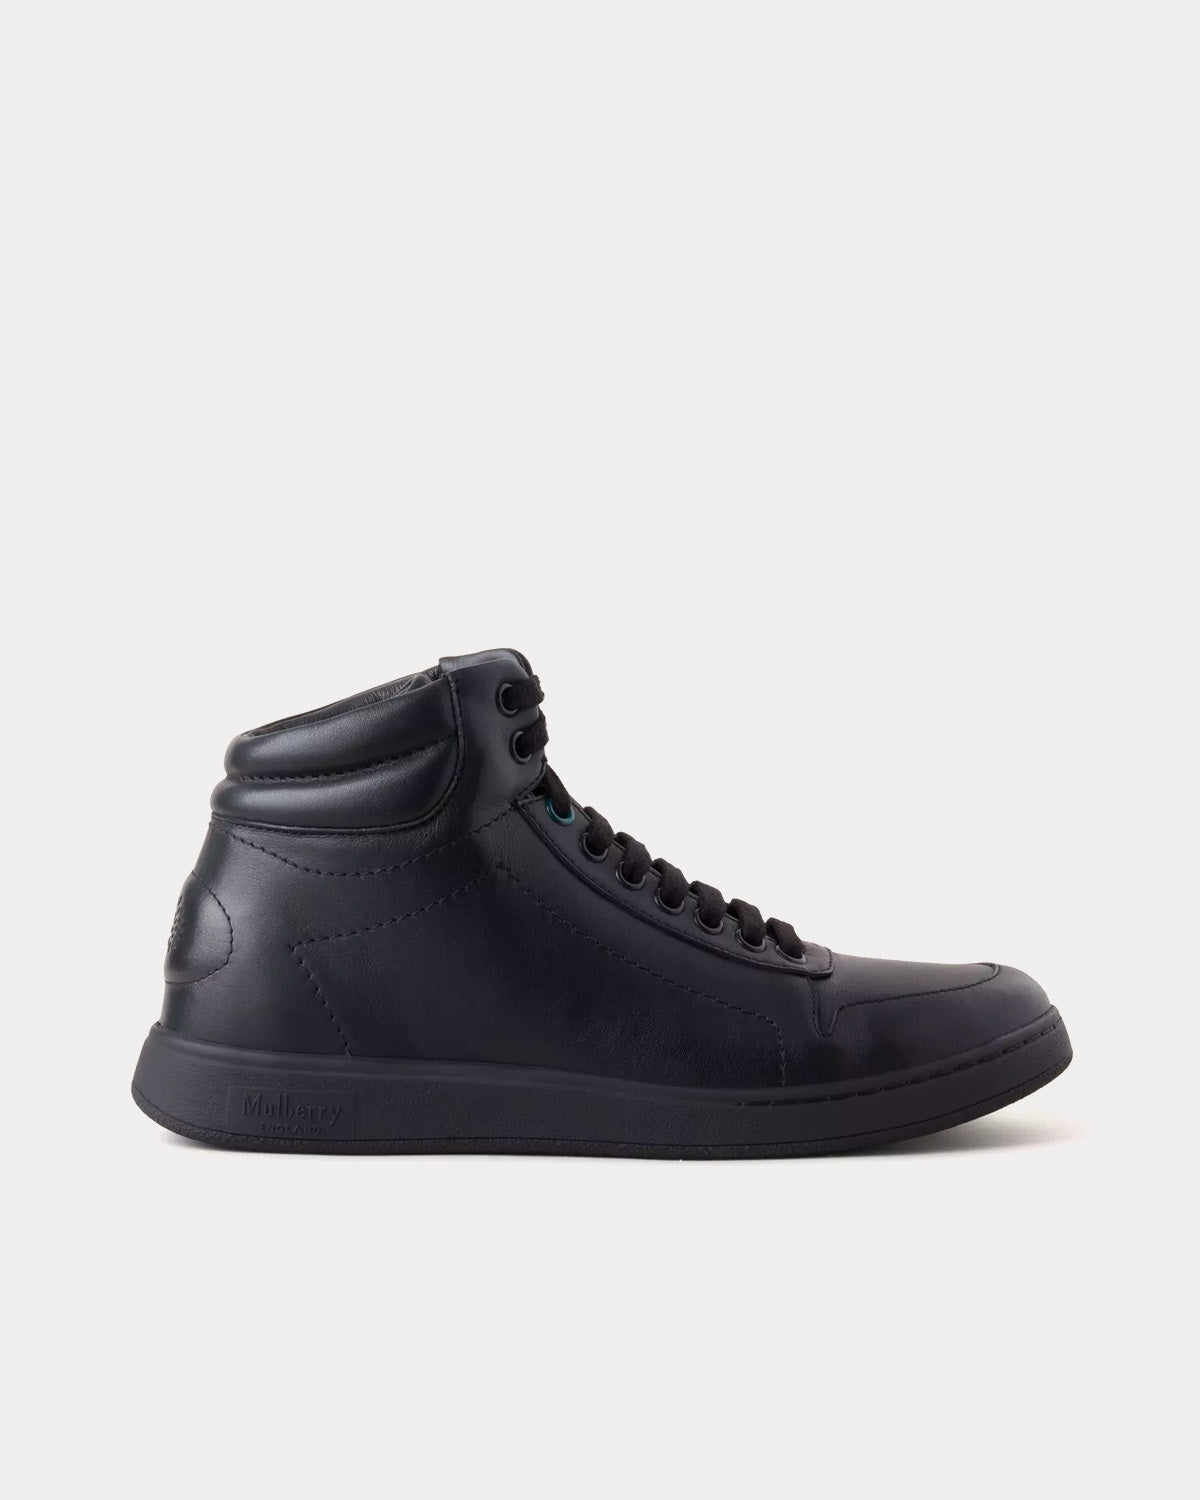 Mulberry - Leather Black High Top Sneakers